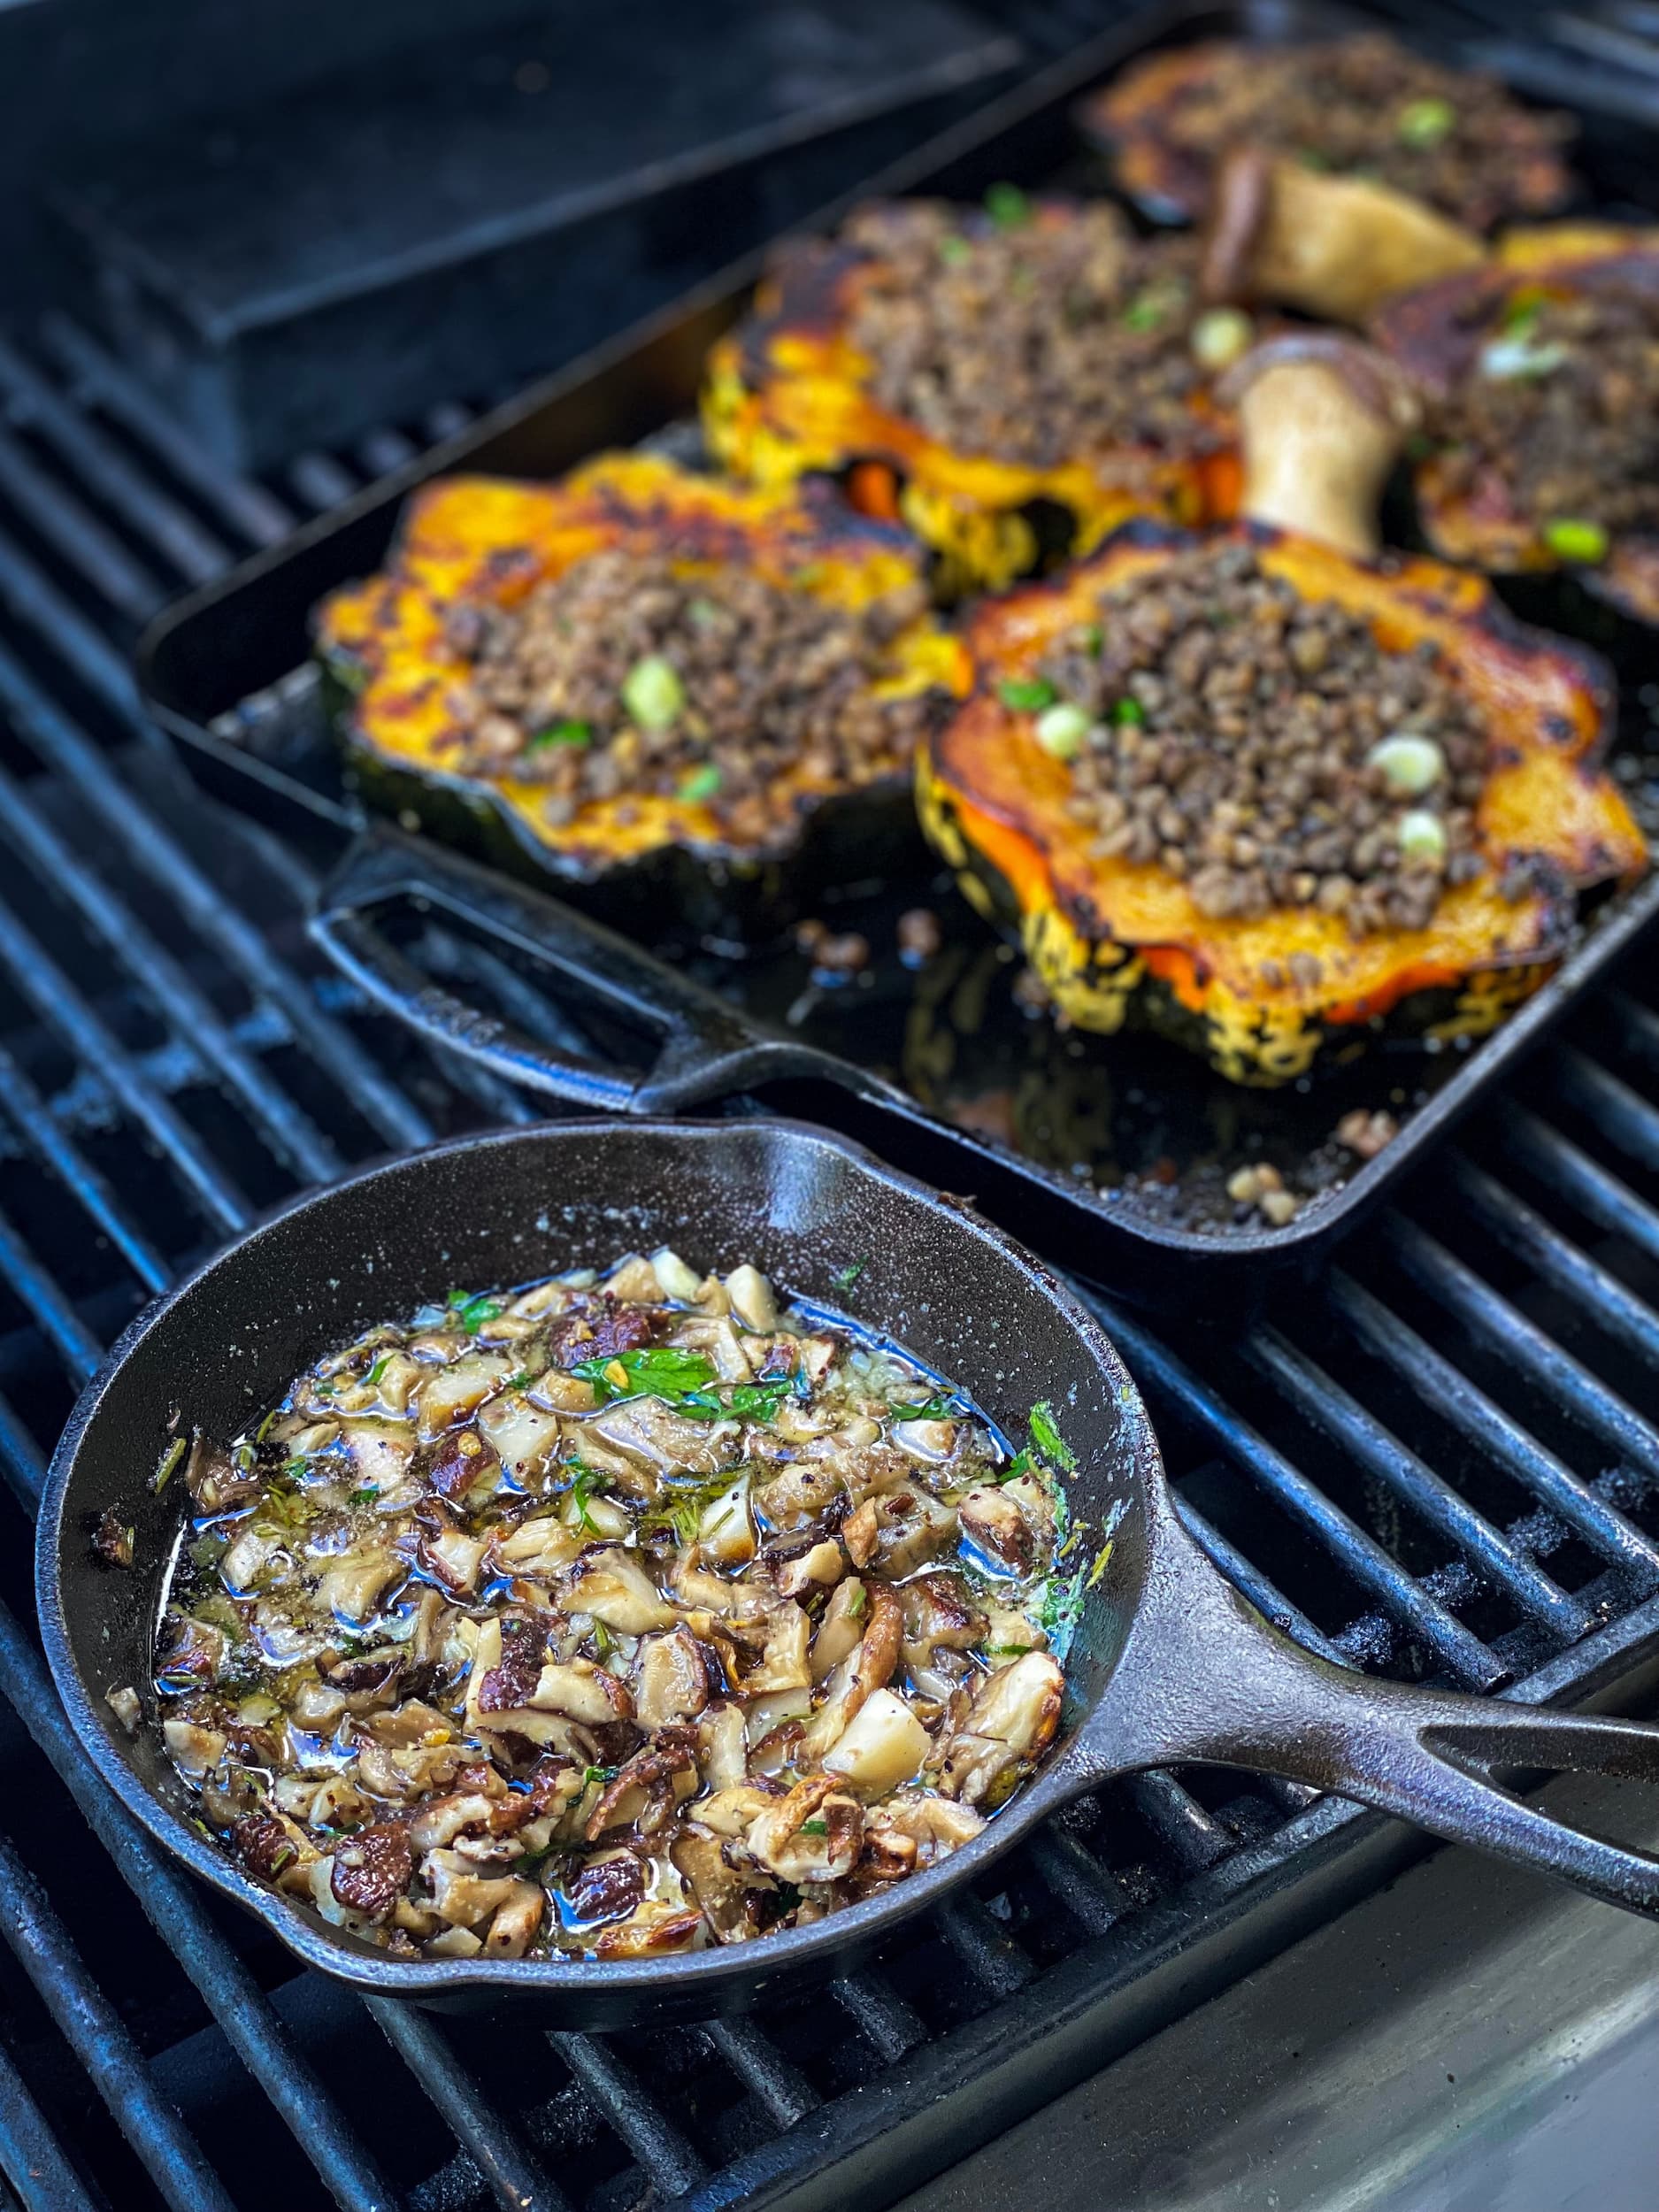 Mushroom lentils and acorn squash cooking in cast iron pans on grill